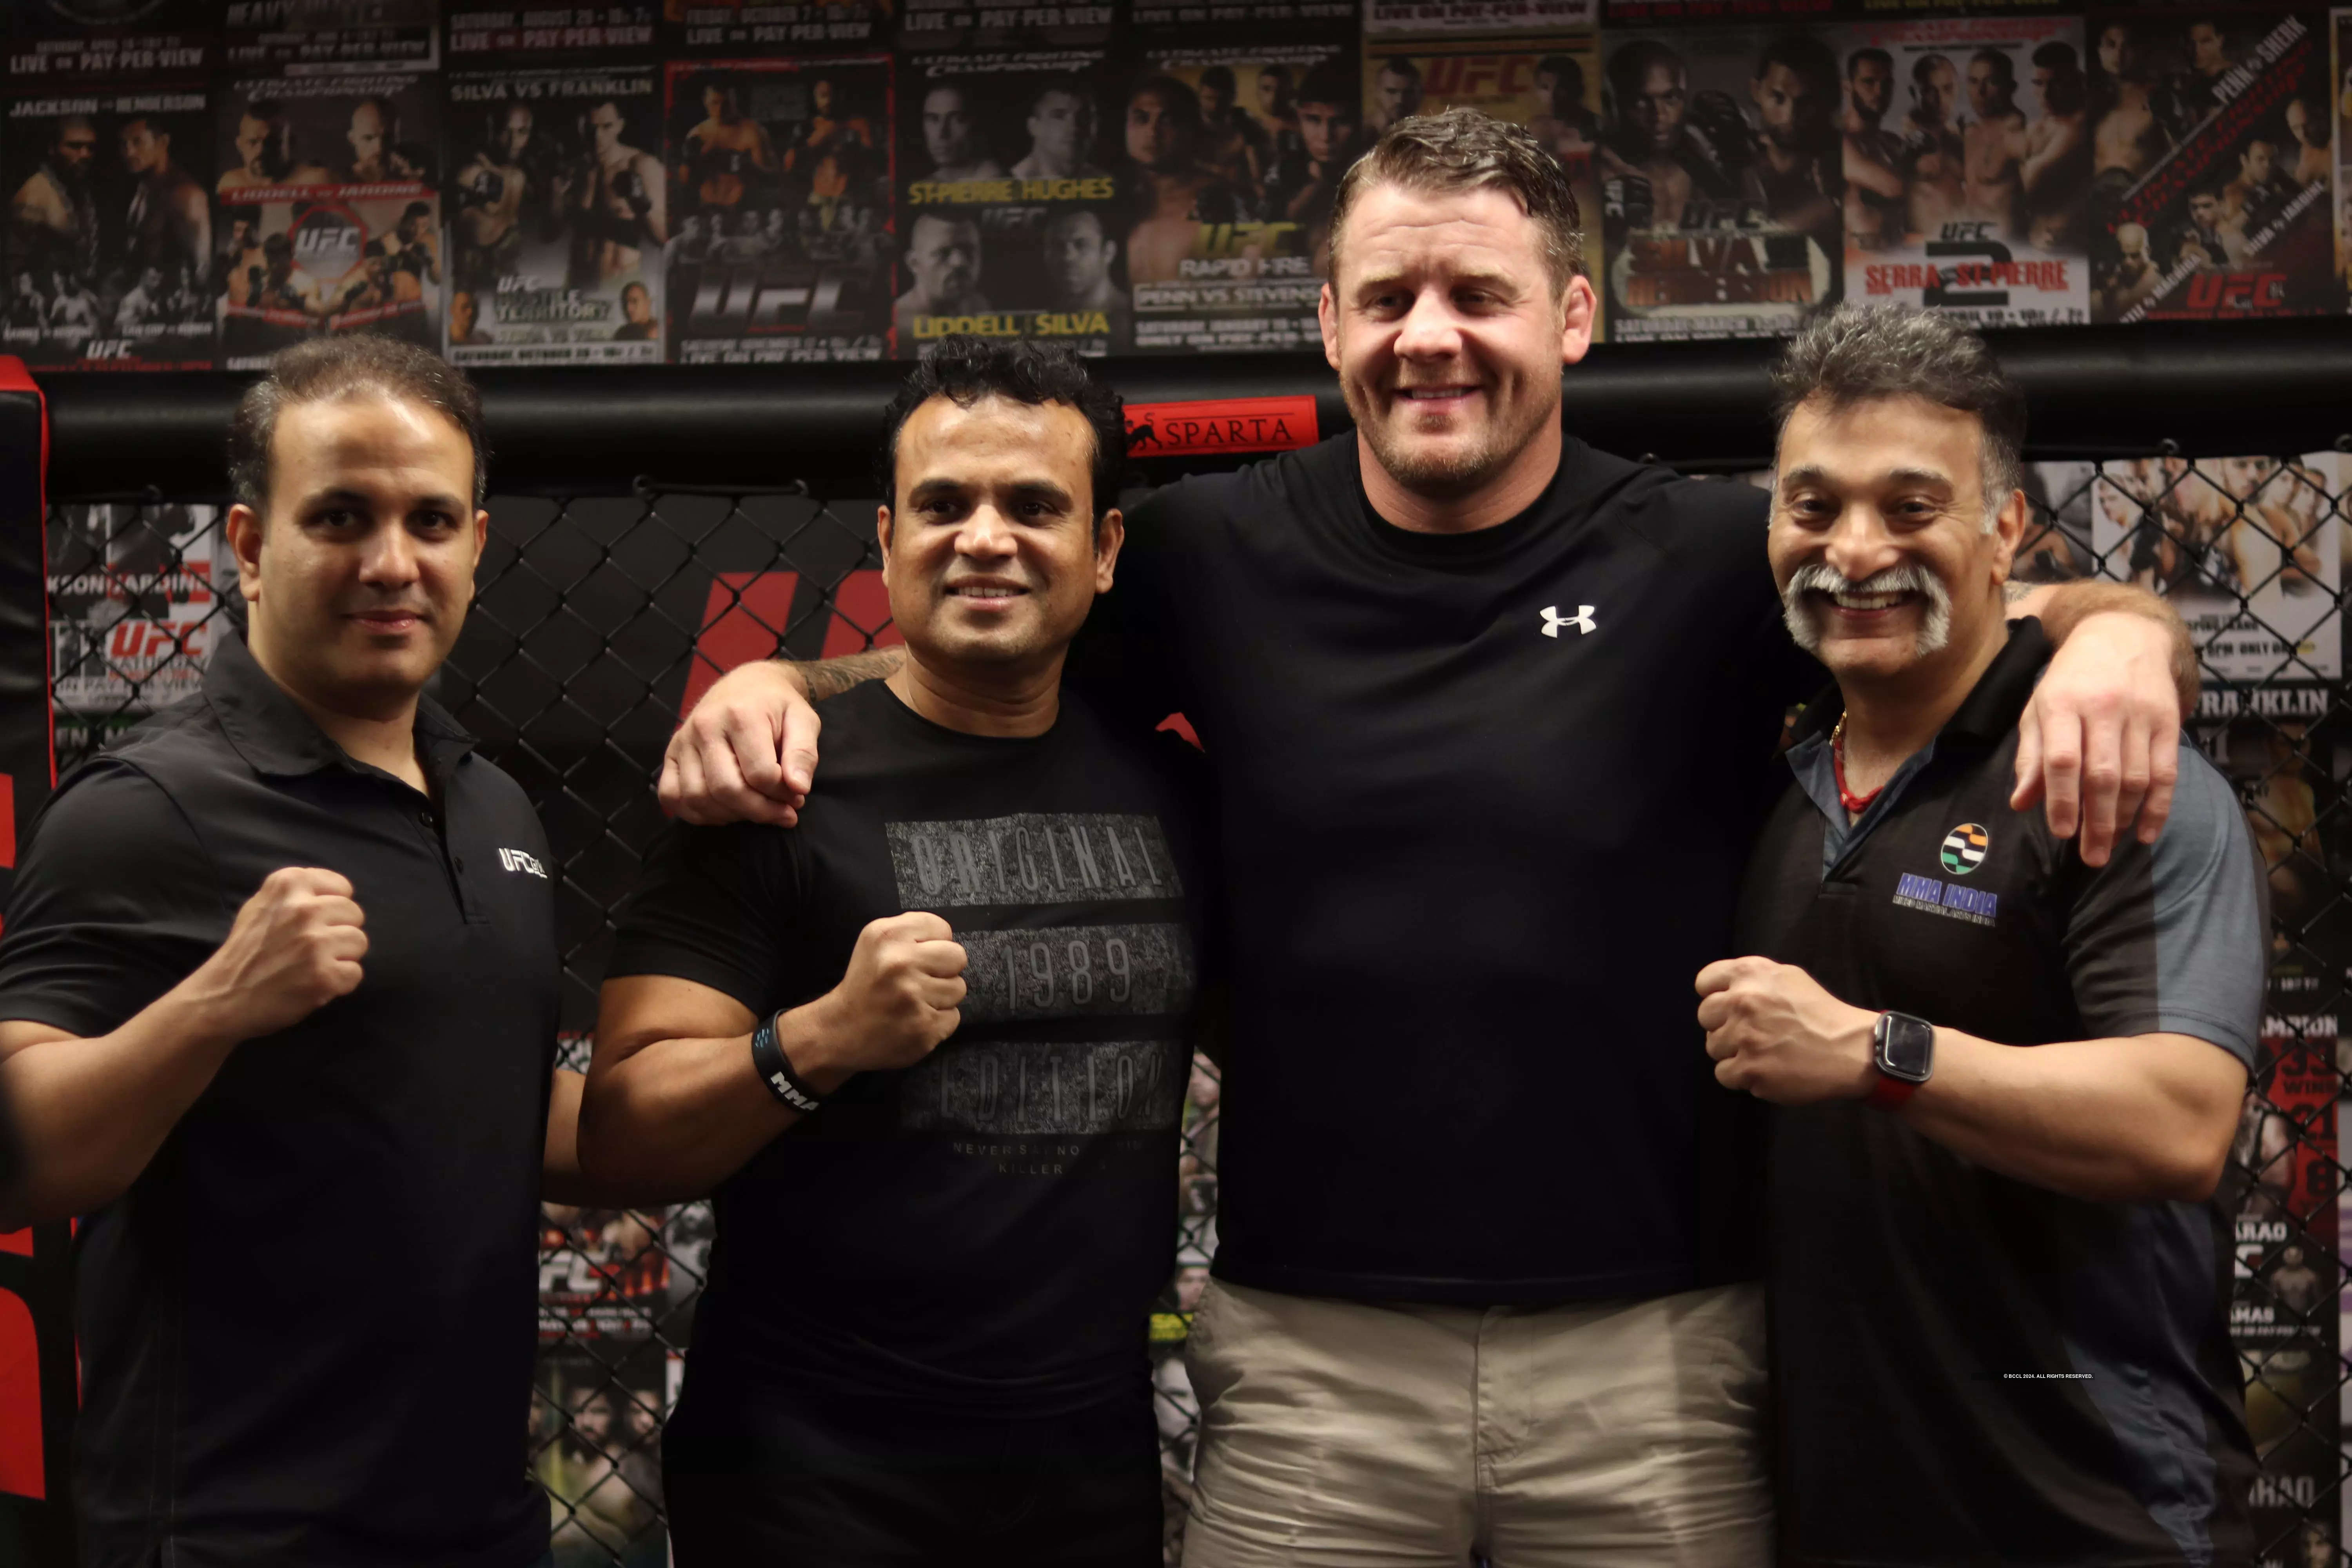 The UFC Gym India & MMA India National Federation hosted the iconic Marc Goddard, see pictures